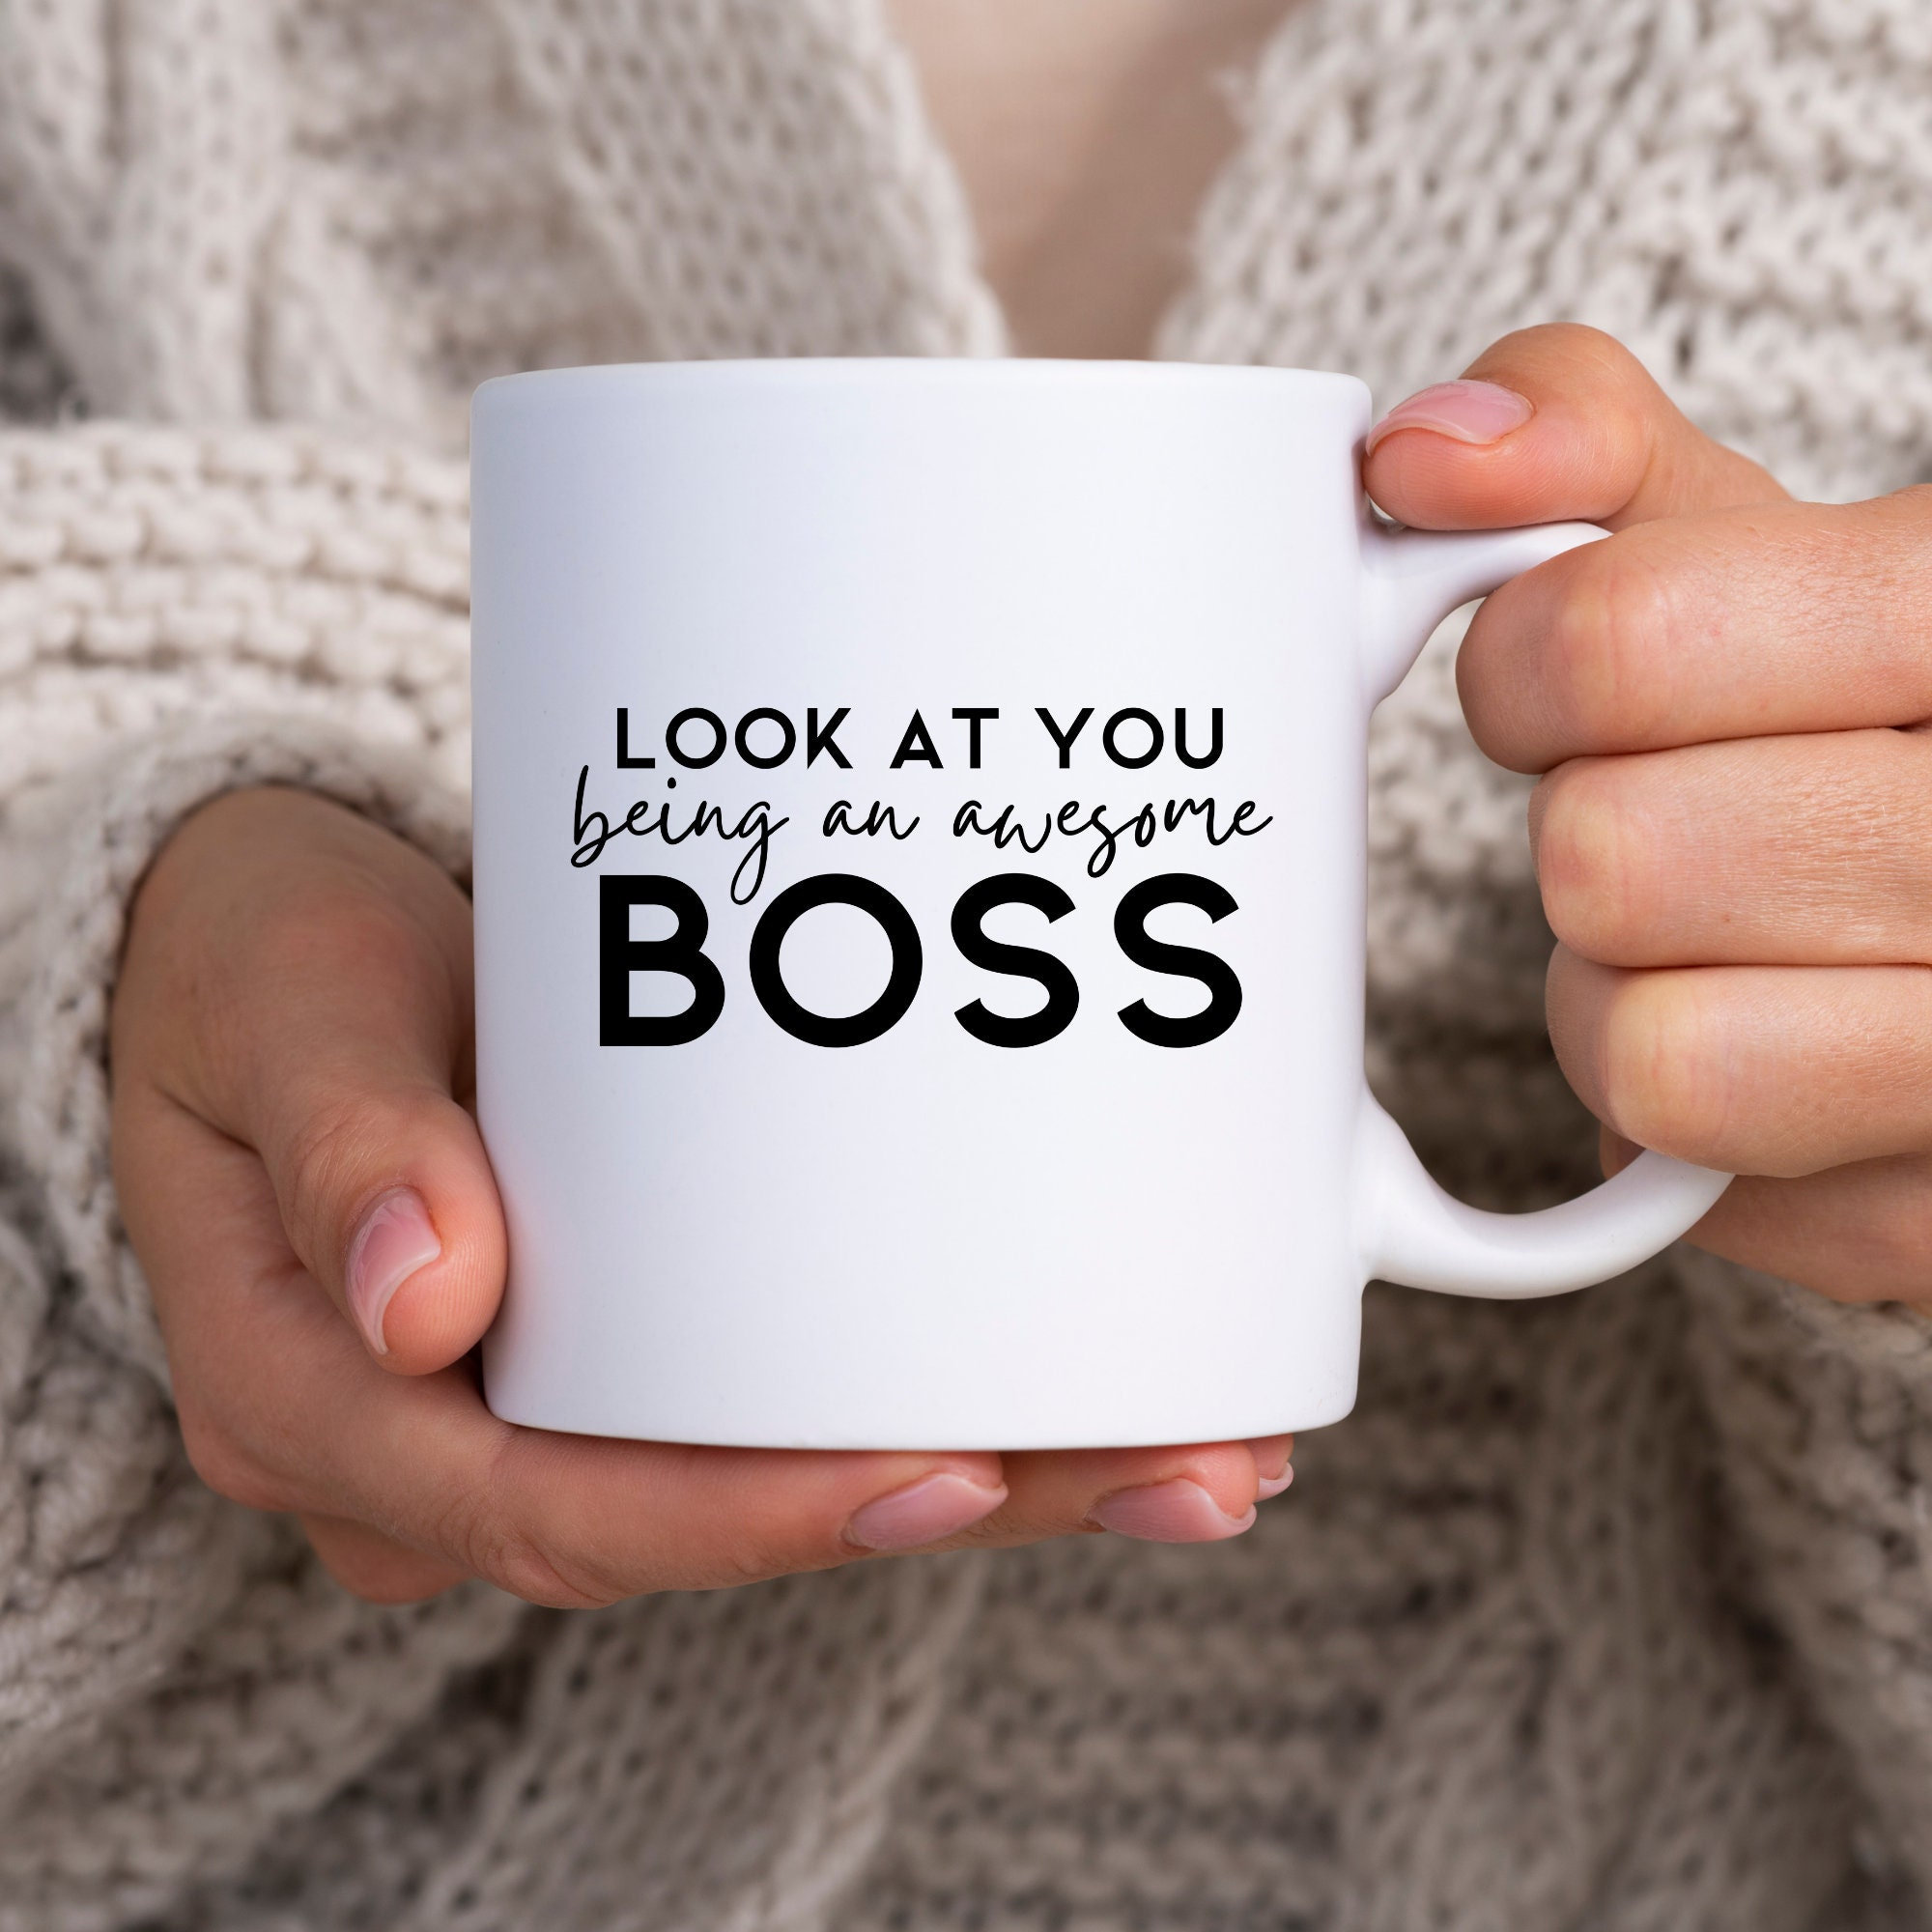 Boss Gifts for Men Women - Ceramics Office Desk Decor Gifts, To my